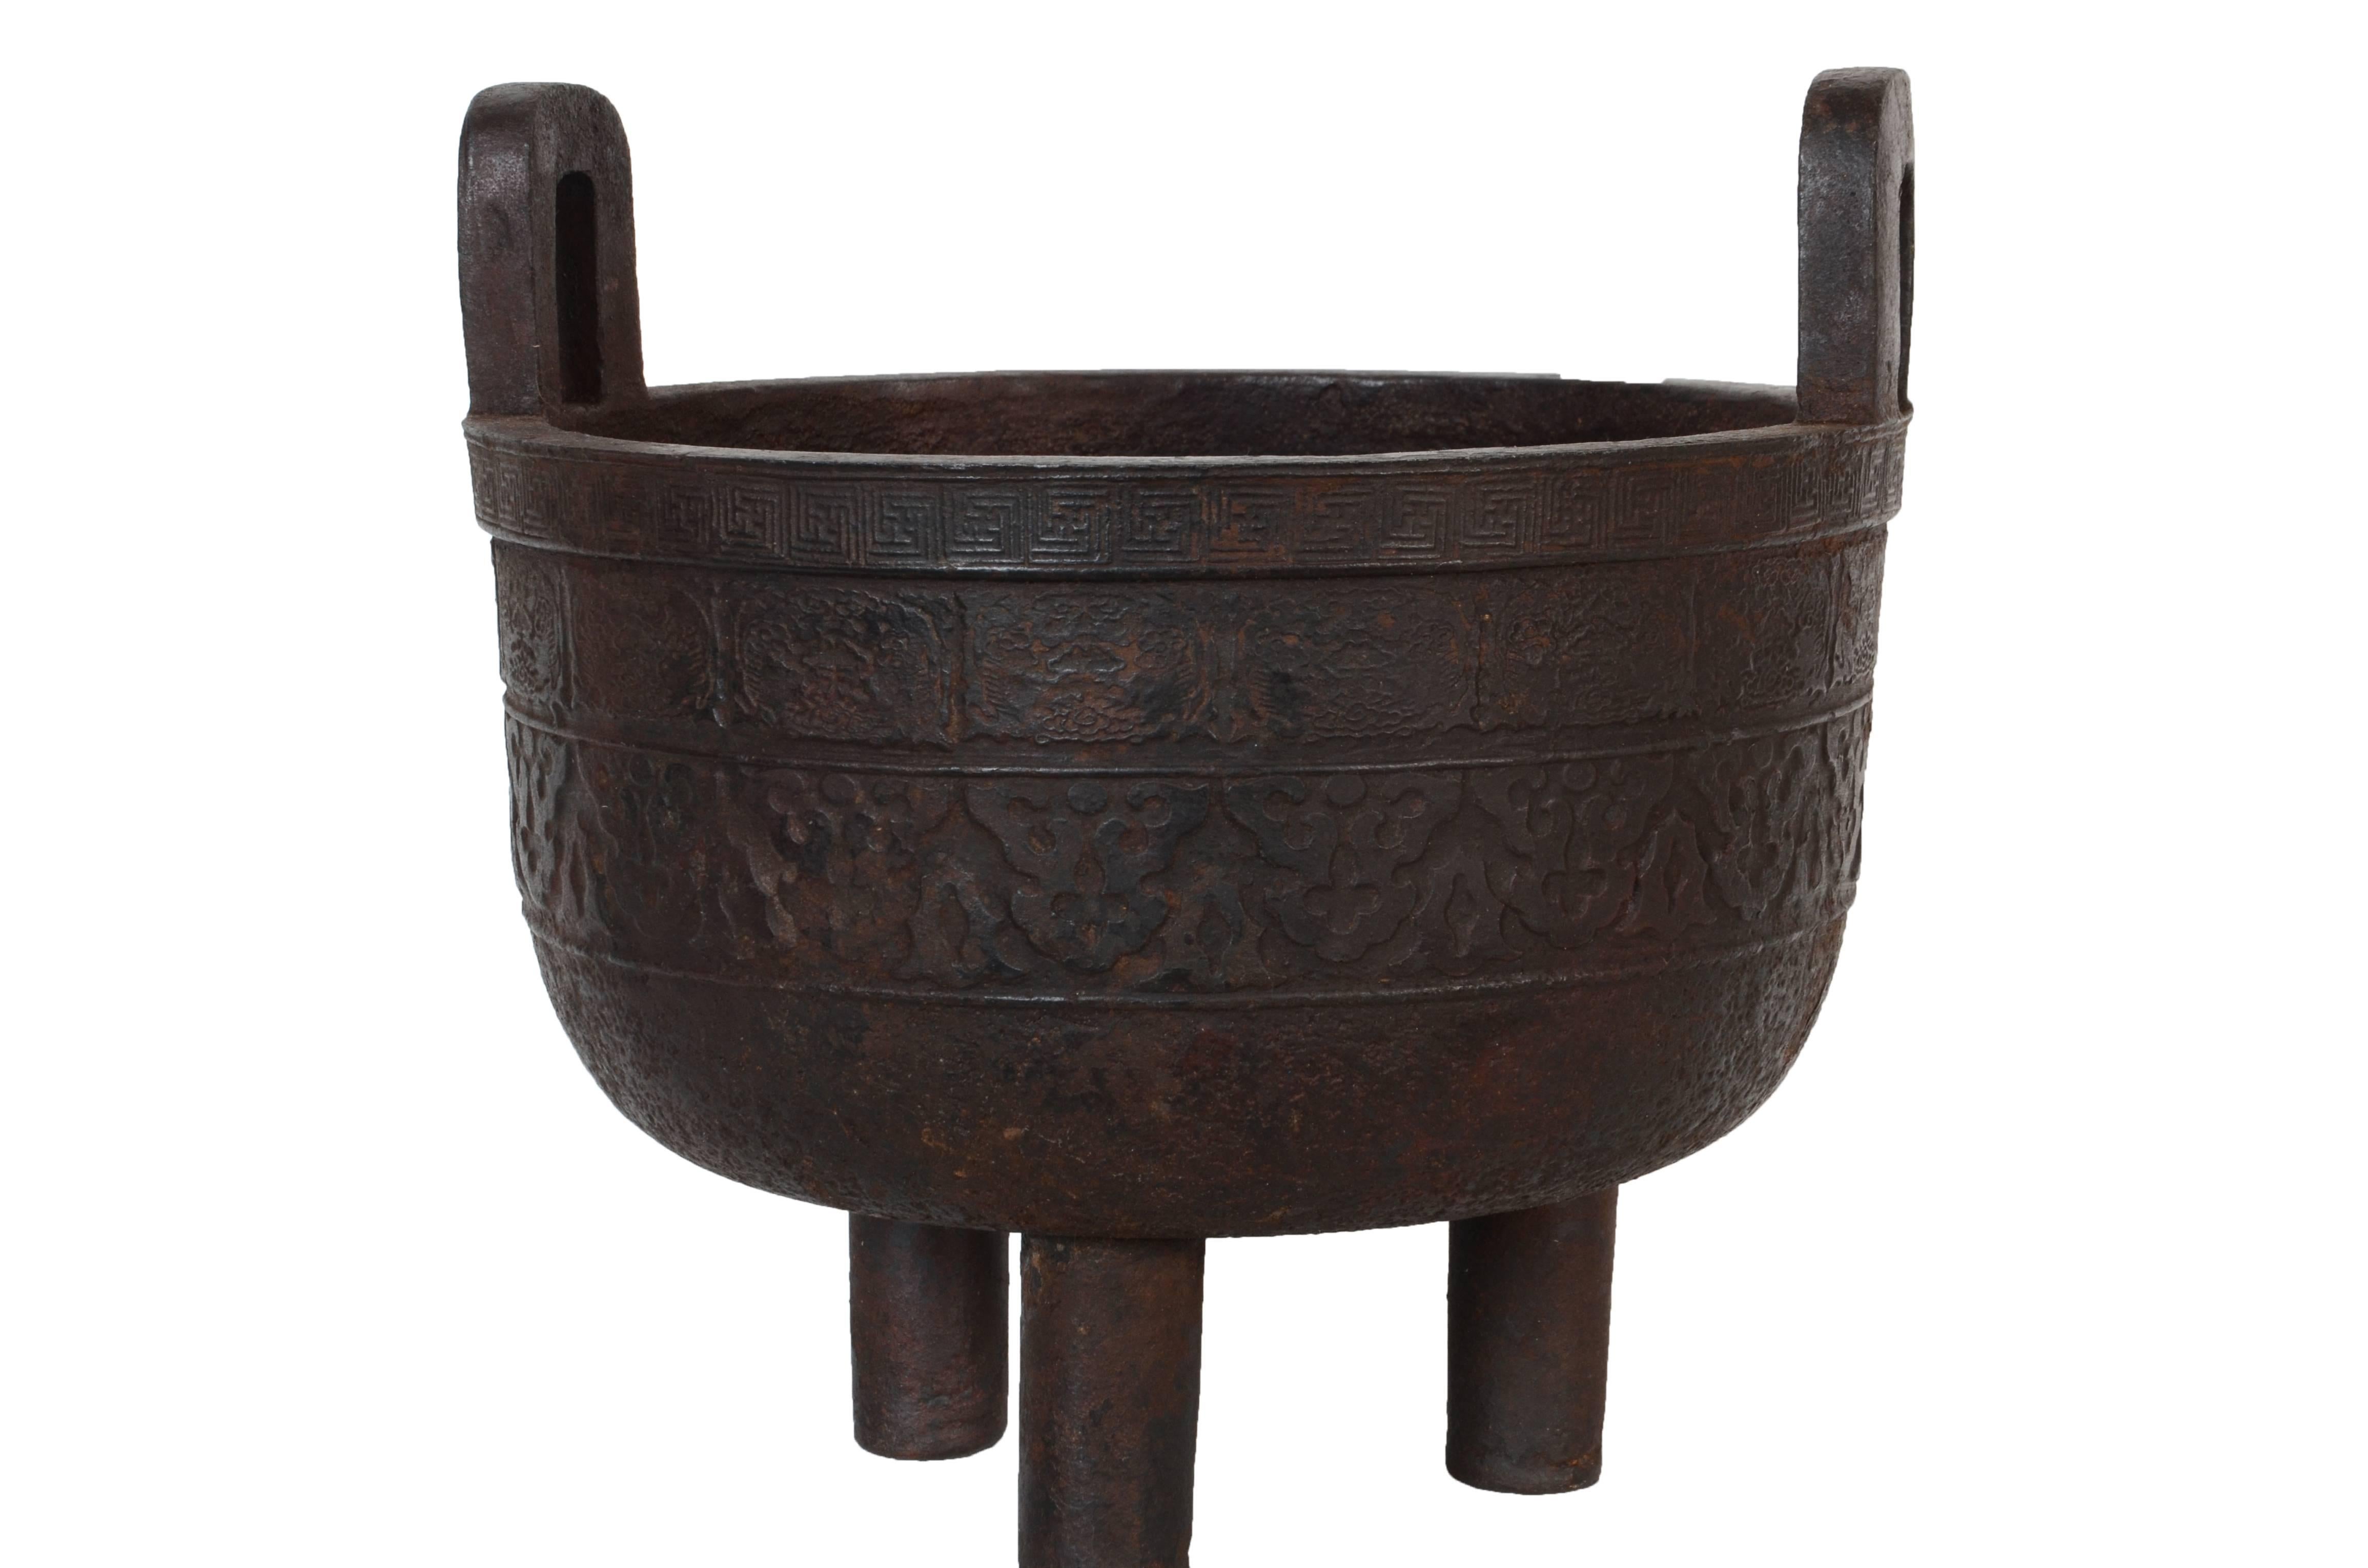 20th Century Chinese Iron Incense Burner with Classical Archaic Motifs, Qing Dynasty